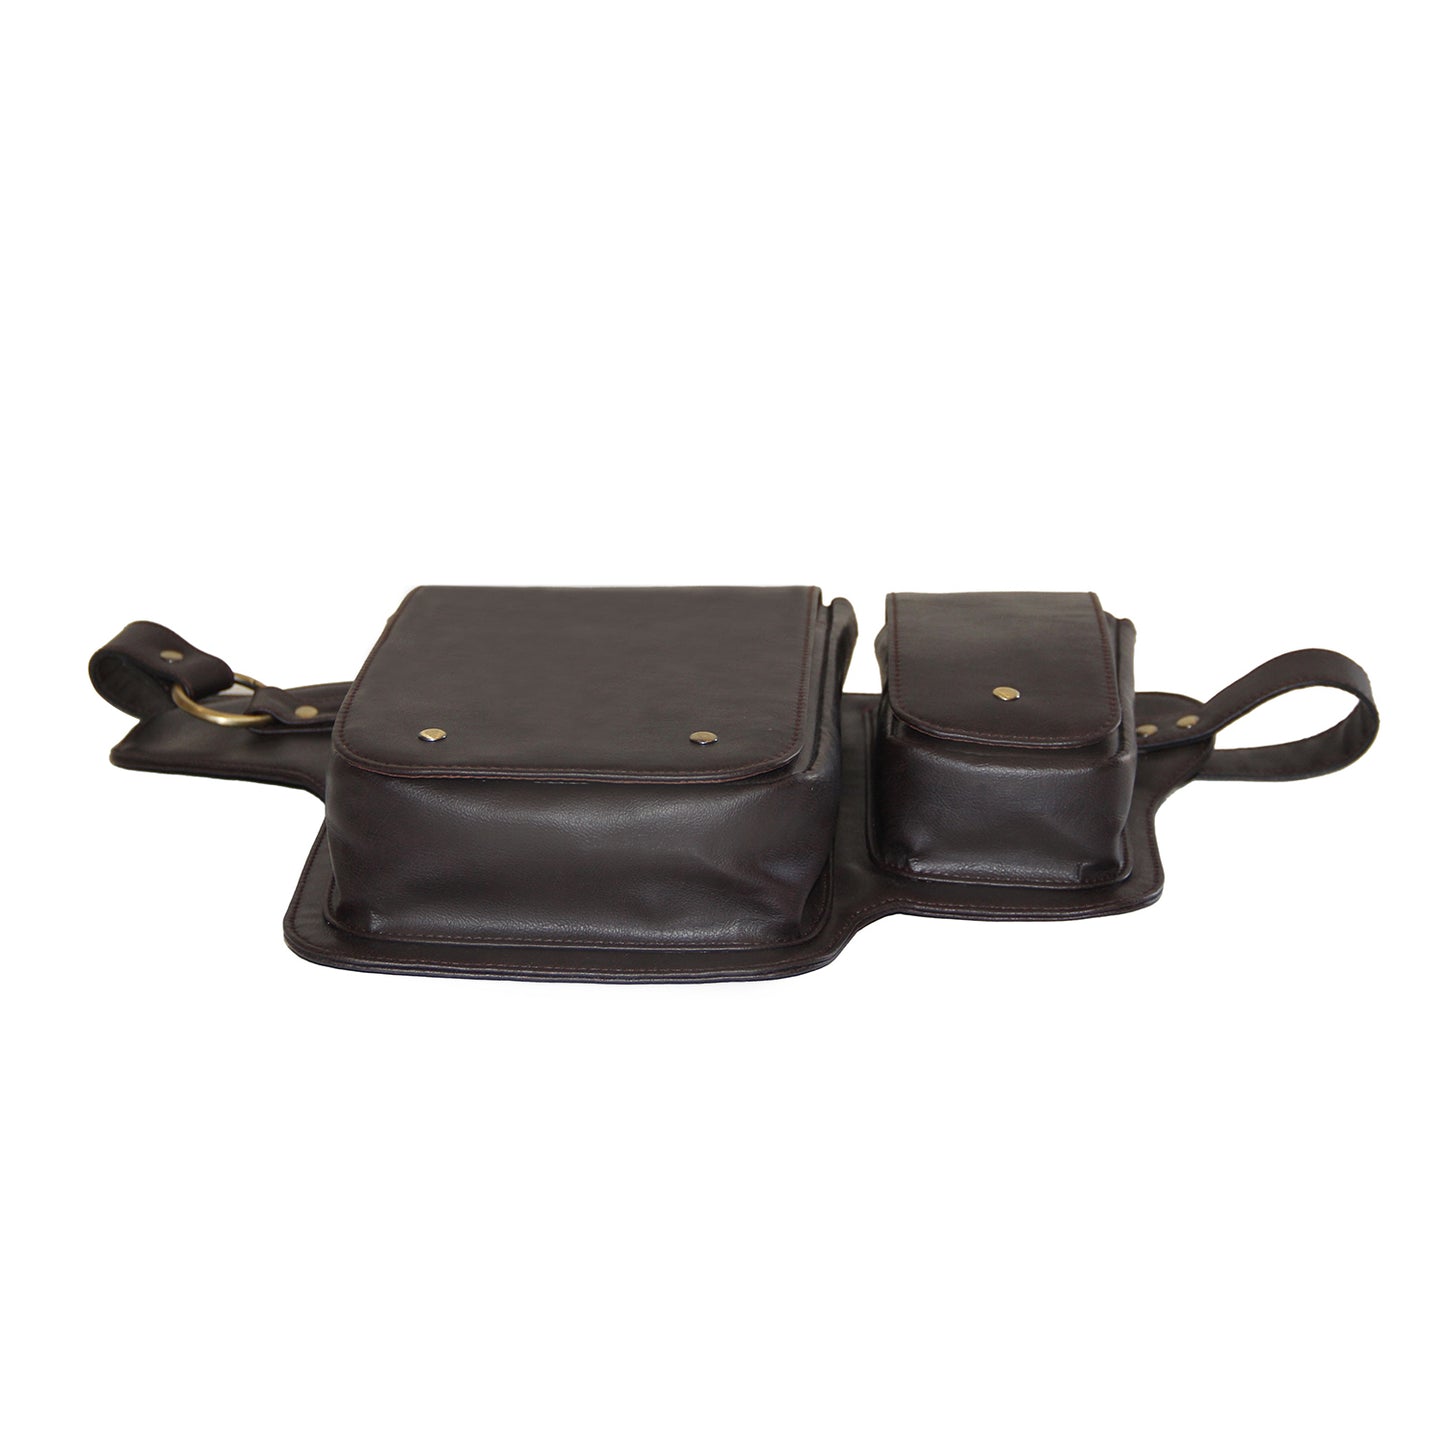 Brown Faux Leather Waist Bag